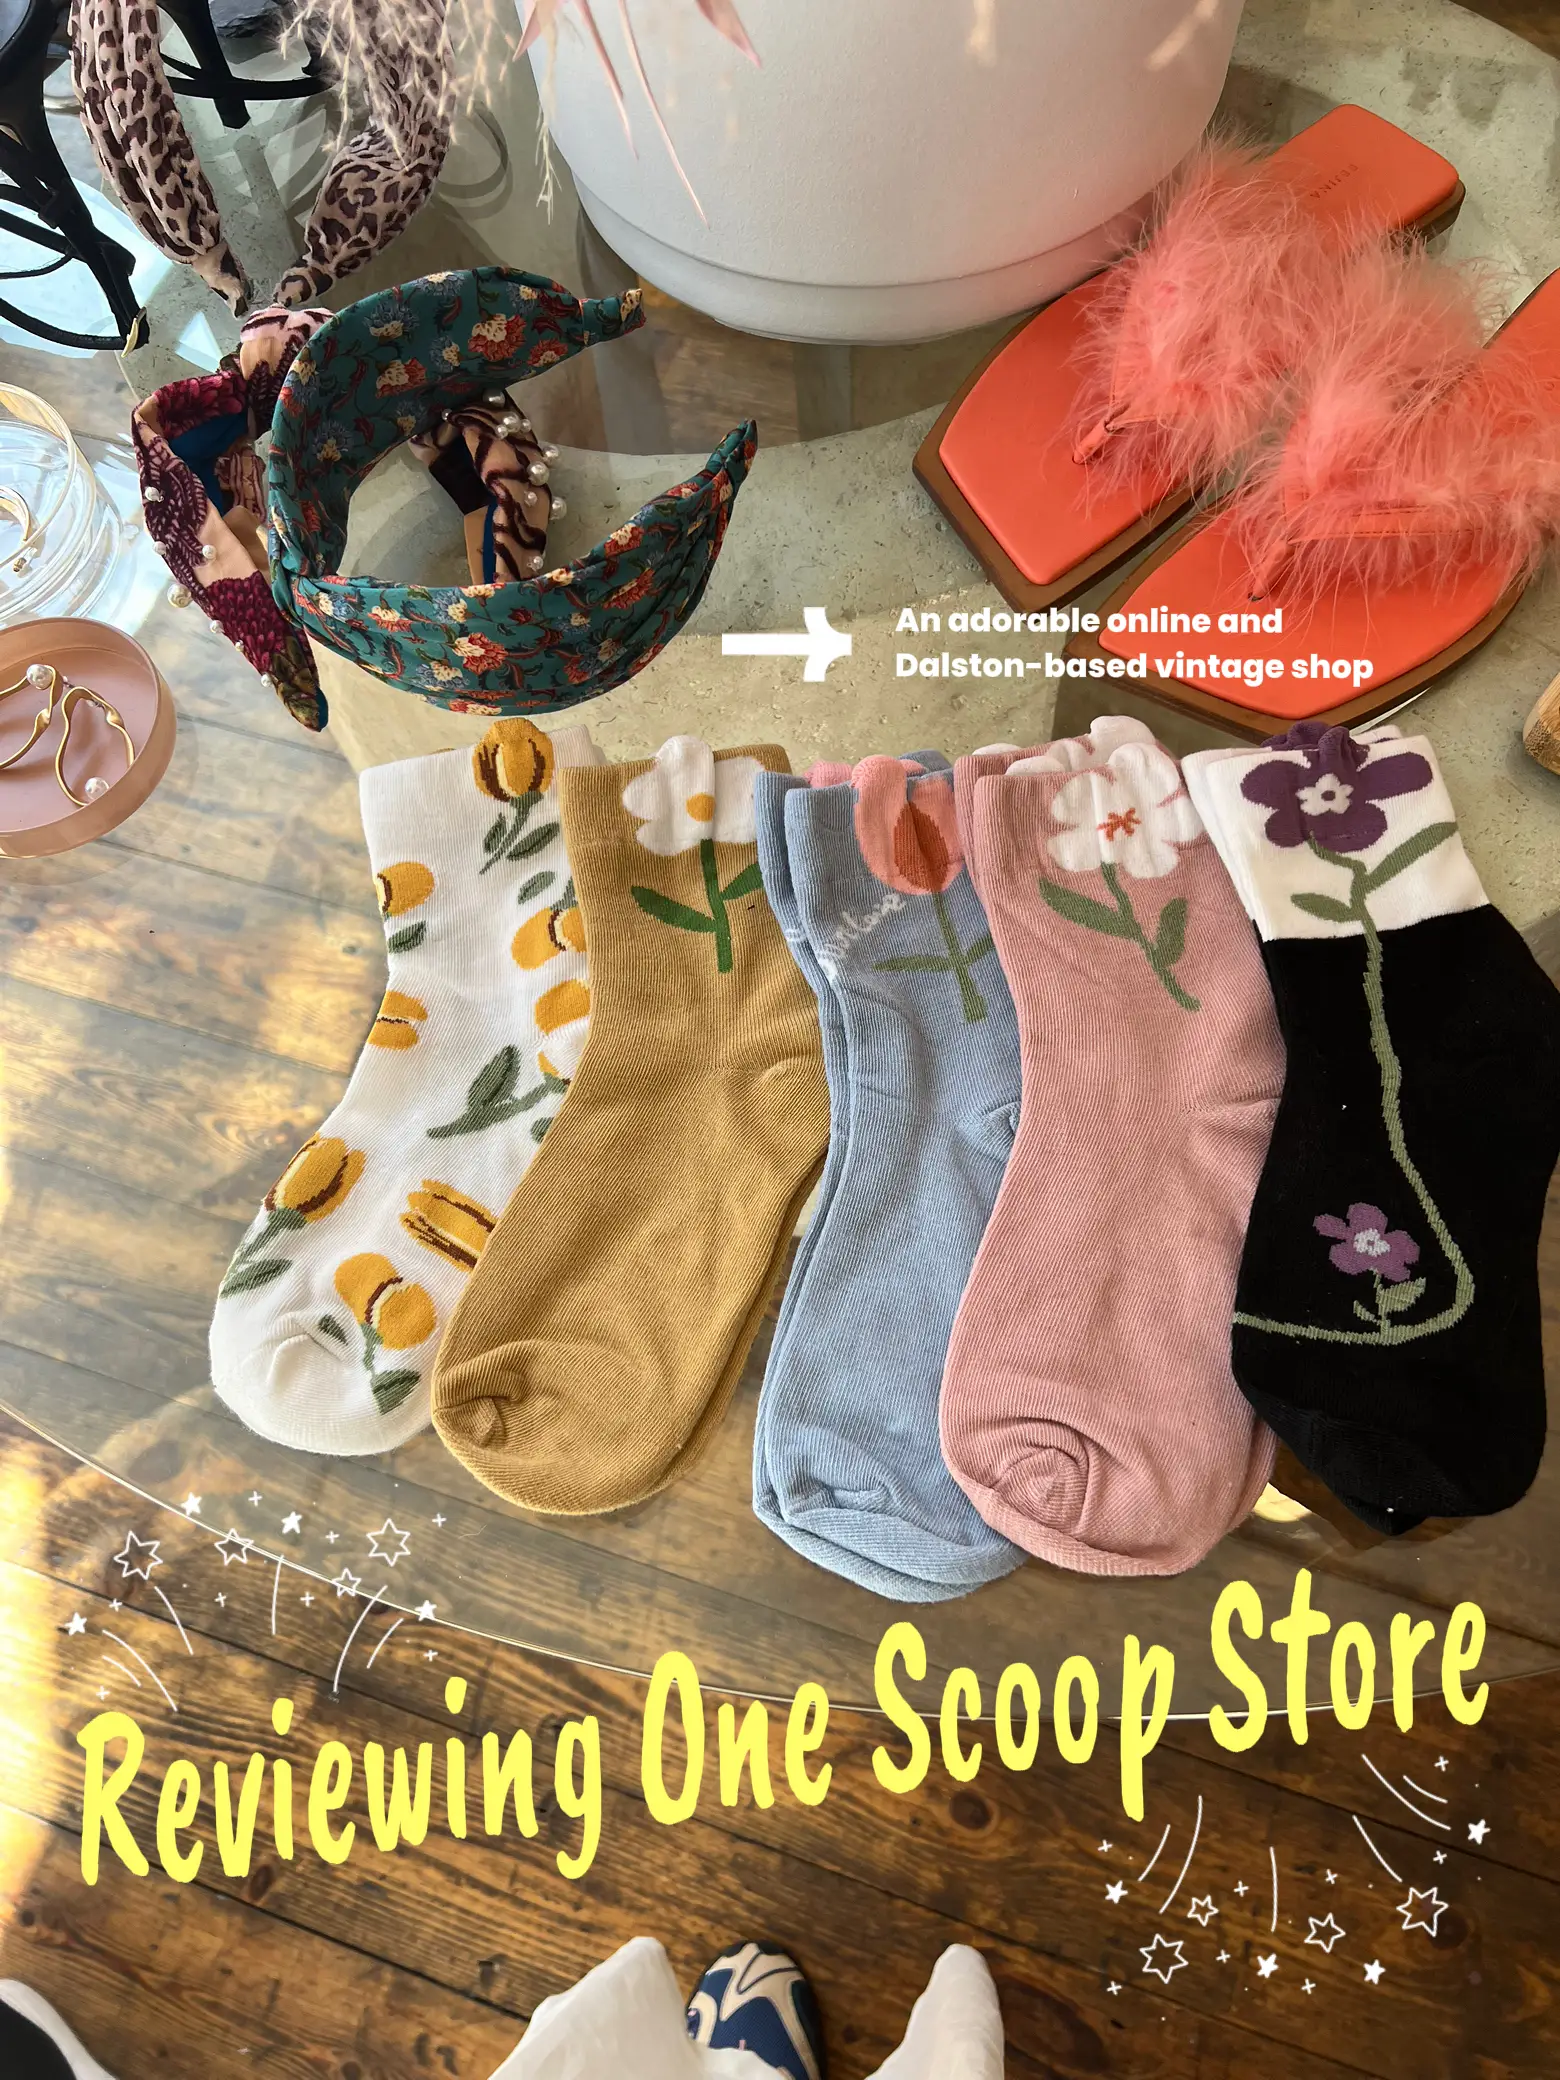 Store — One Scoop Store